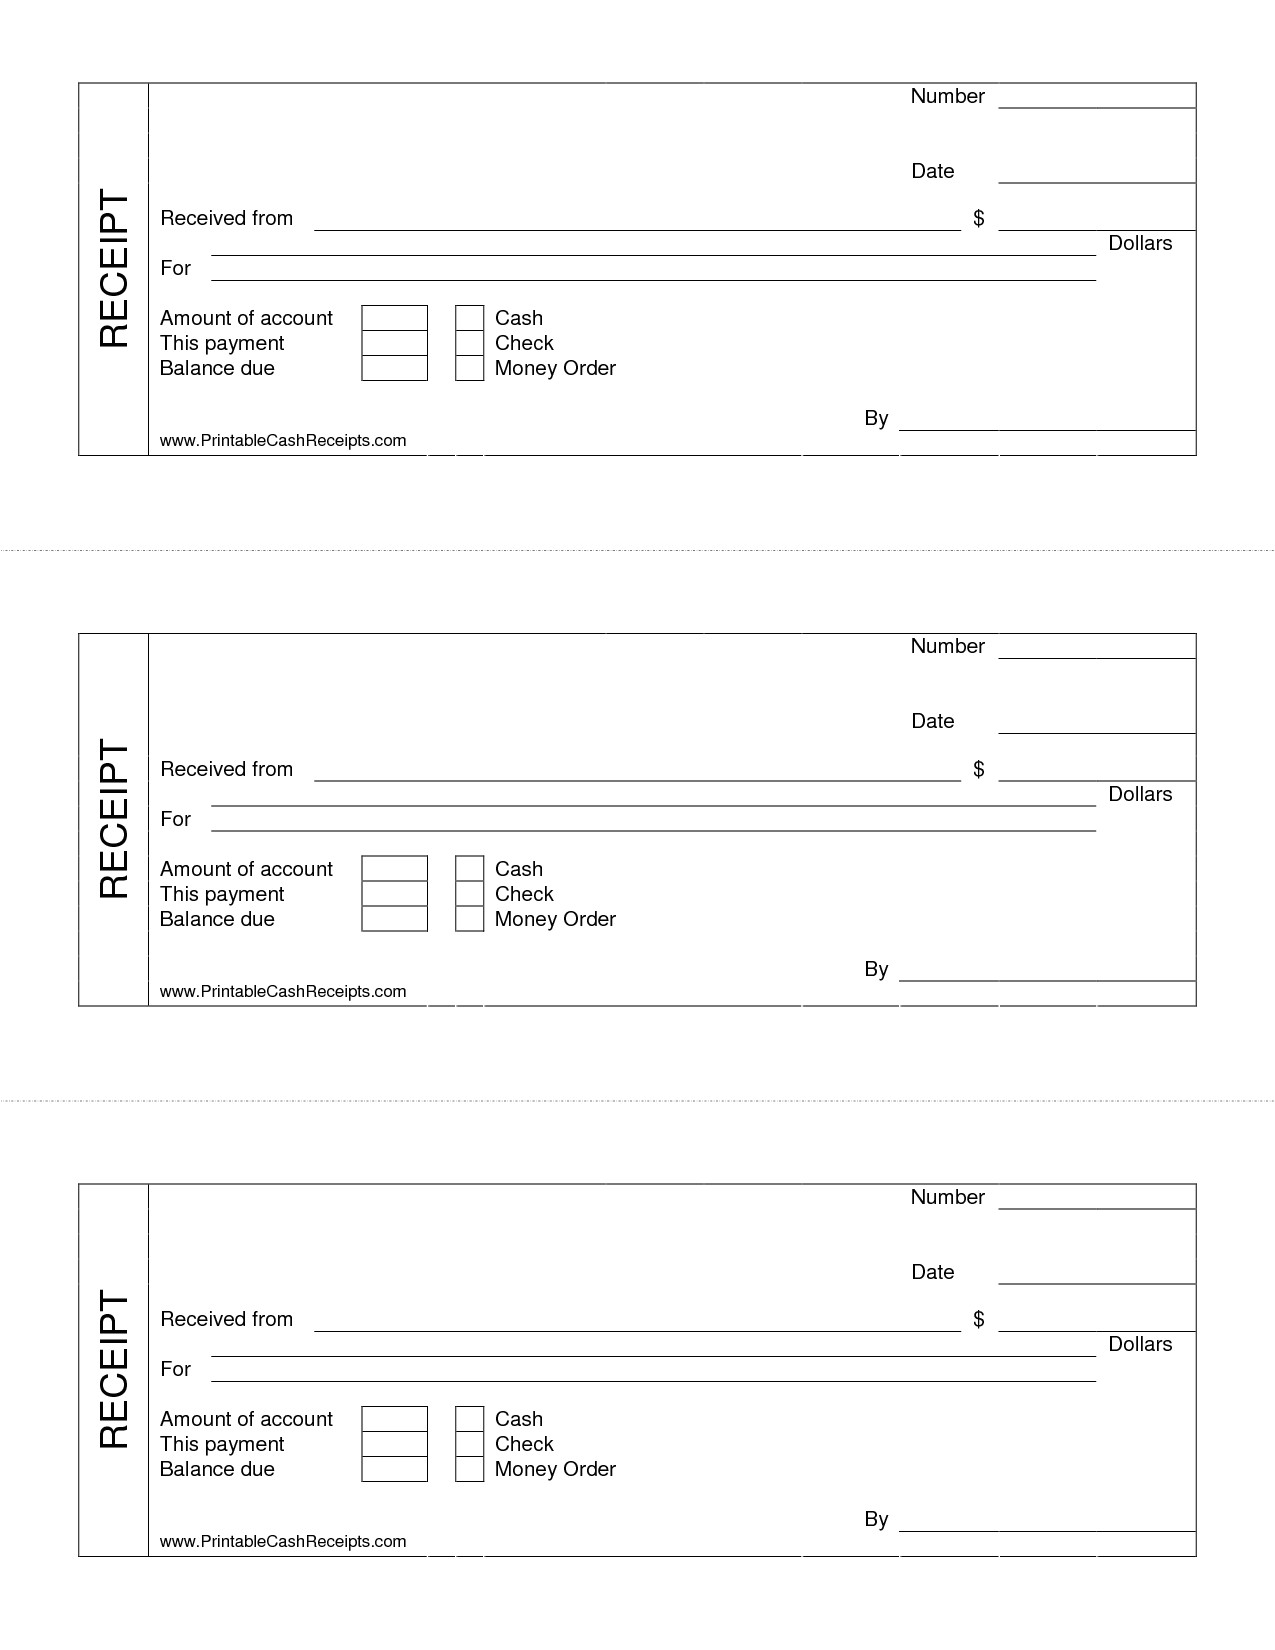 Printable Cash Receipt Template 9 Best Images Of Free Printable Blank Receipts Free